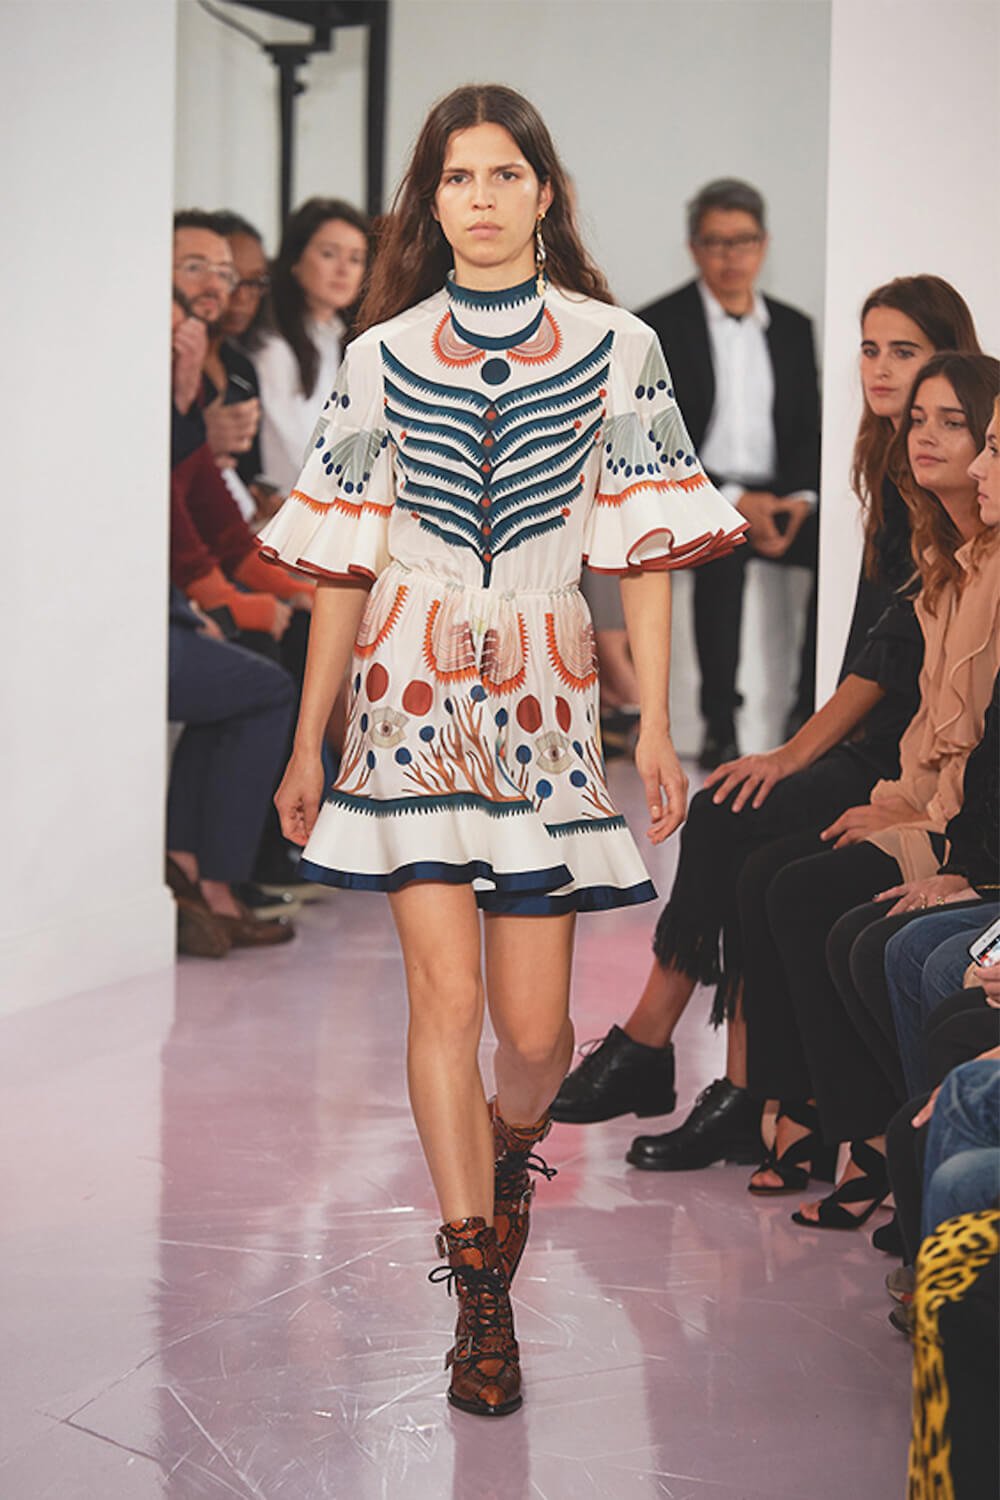 Ten's To Do: Flick Through The Pages Of 'Chloé Catwalk: The